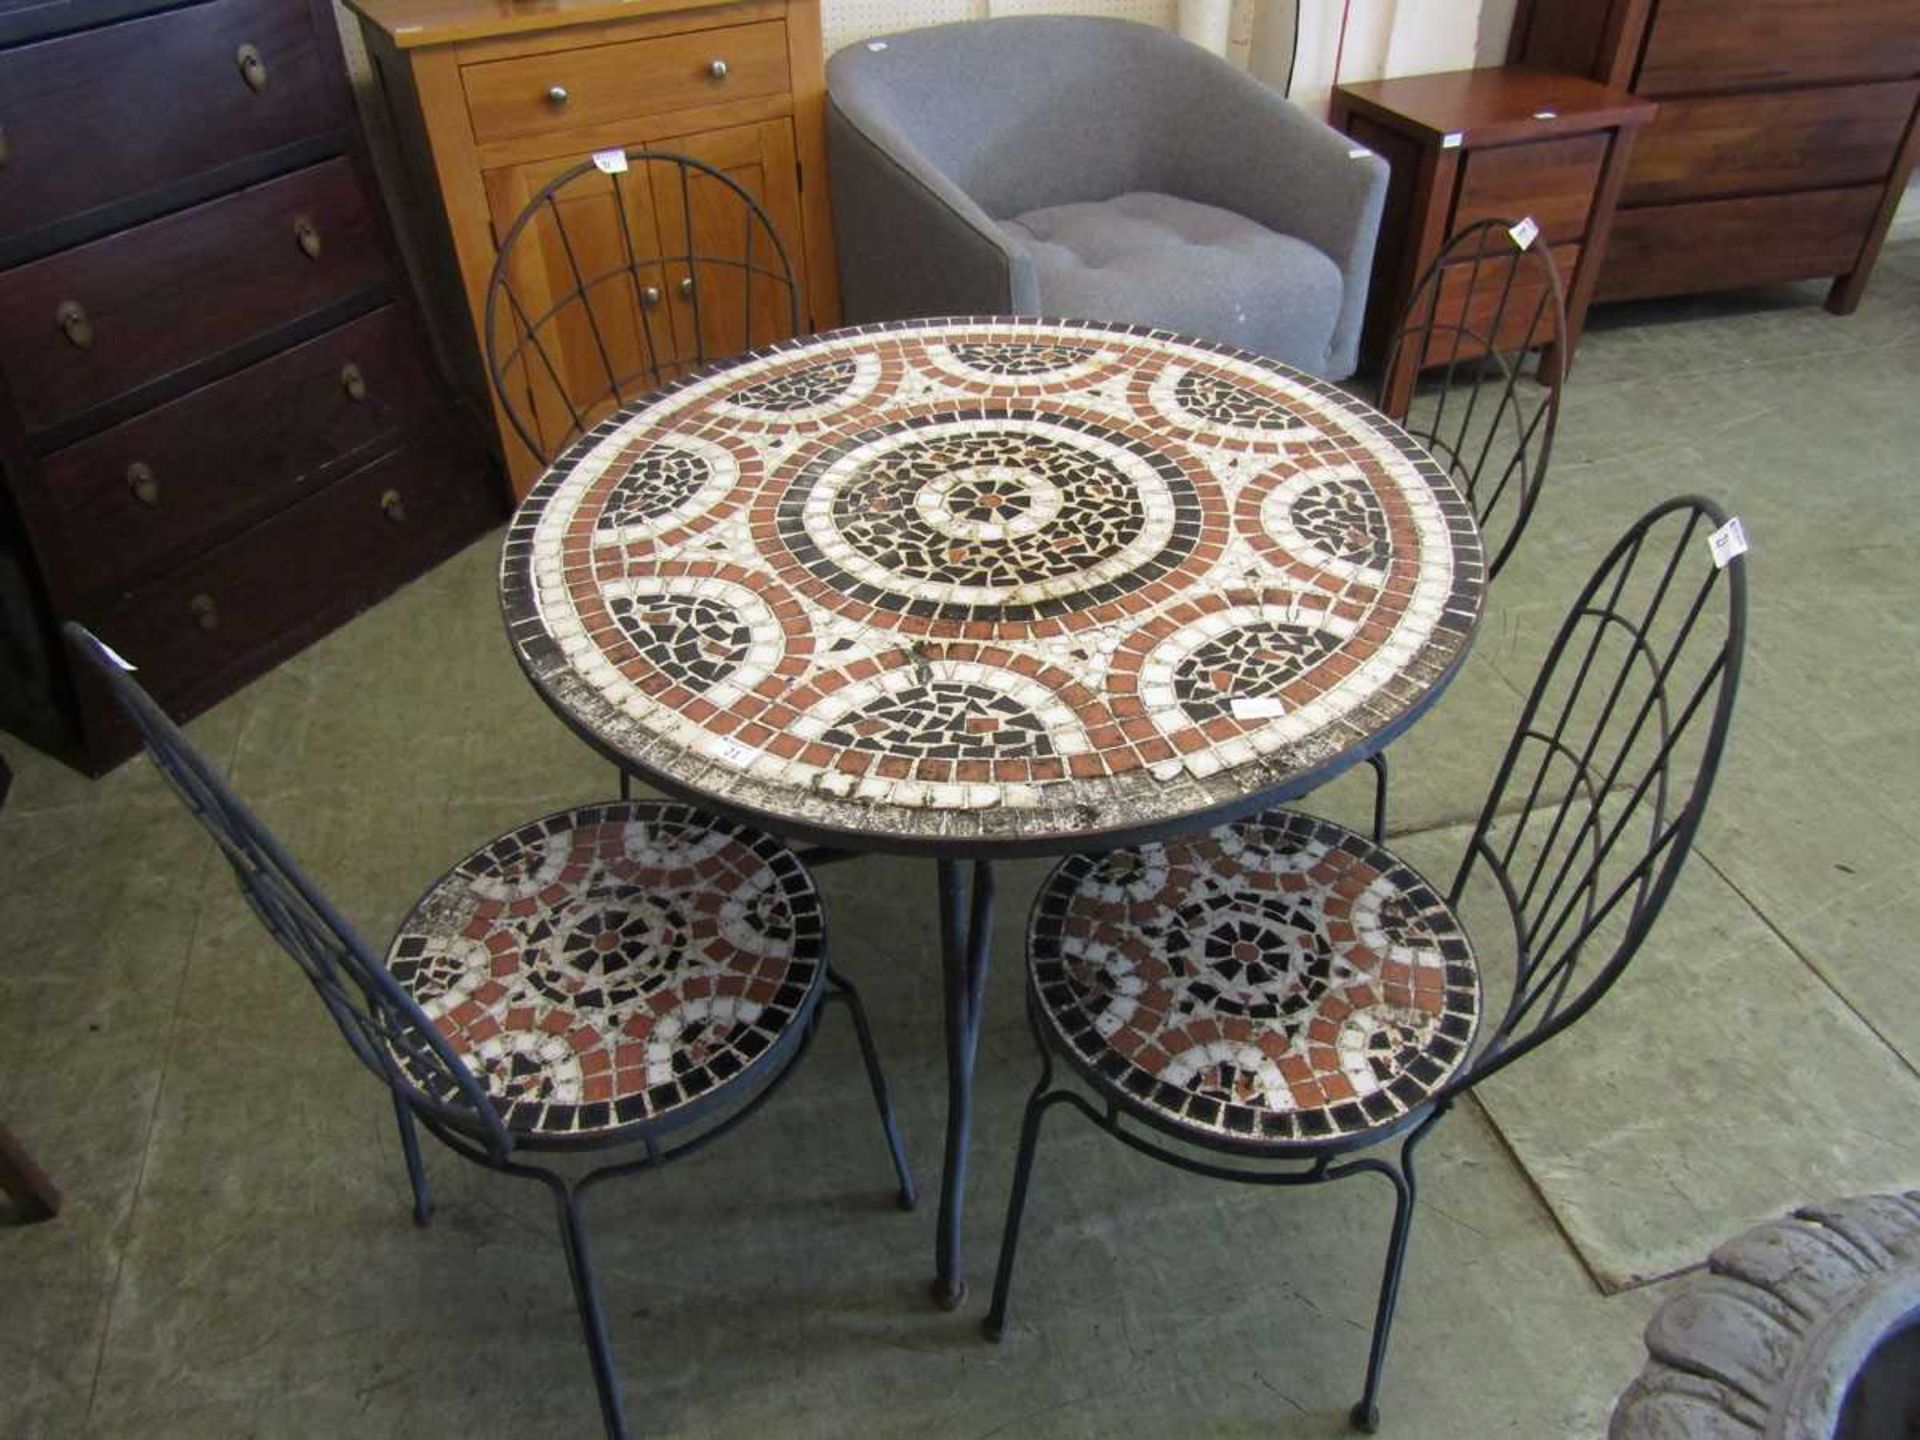 A specimen mosaic tiled top circular metal supported table with a set of four matching chairs